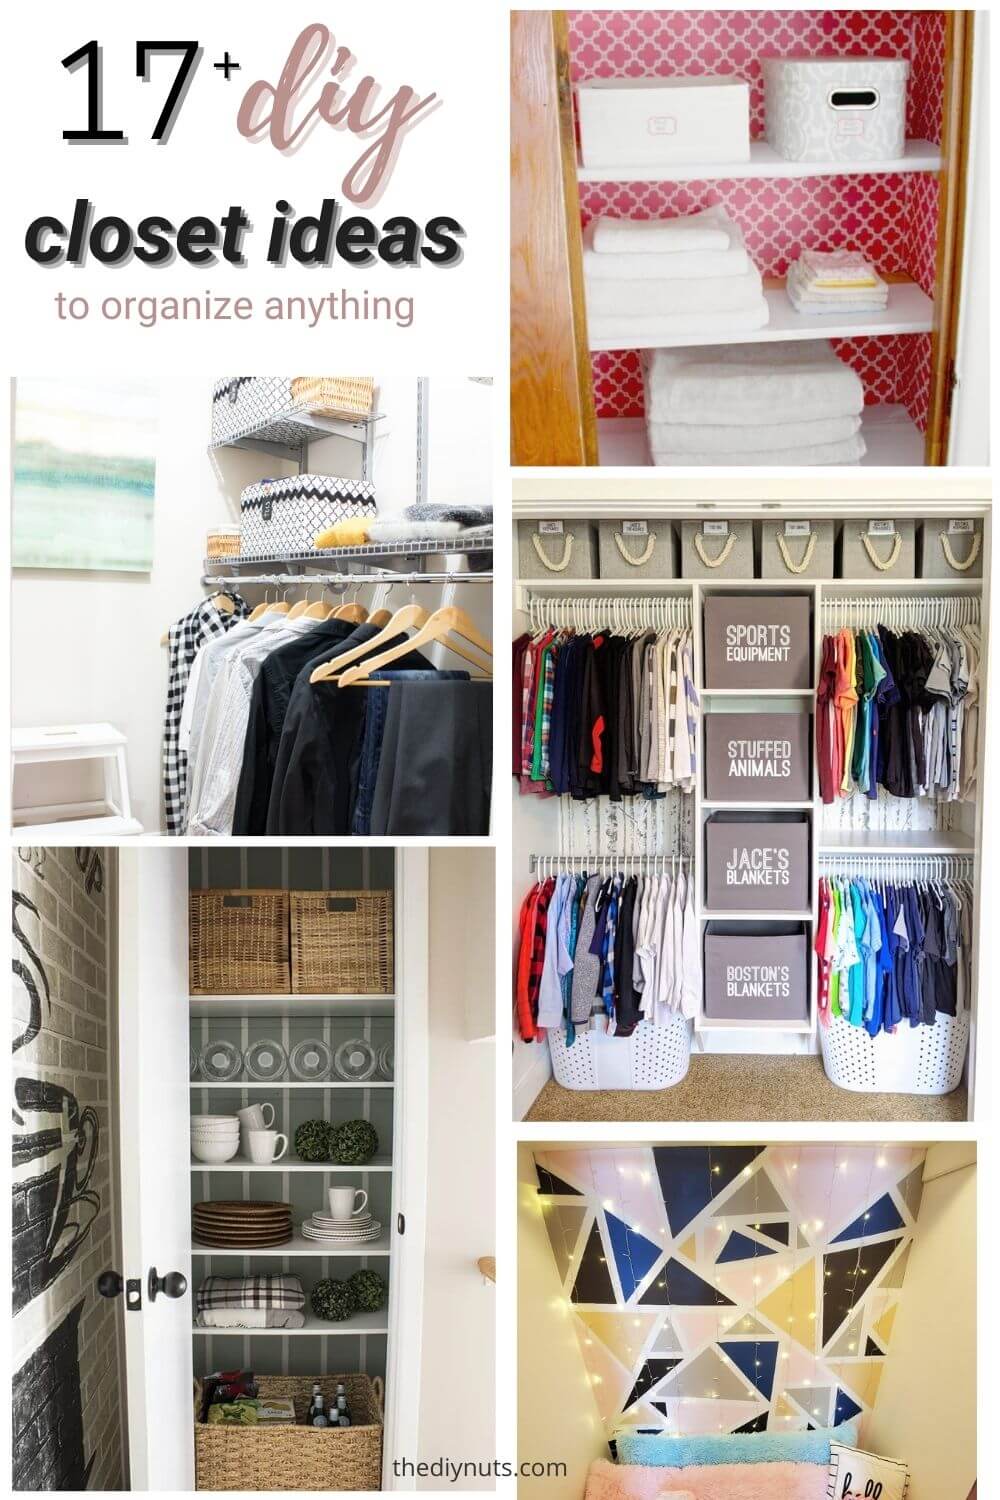 17+ diy closet ideas with 5 different images of closets